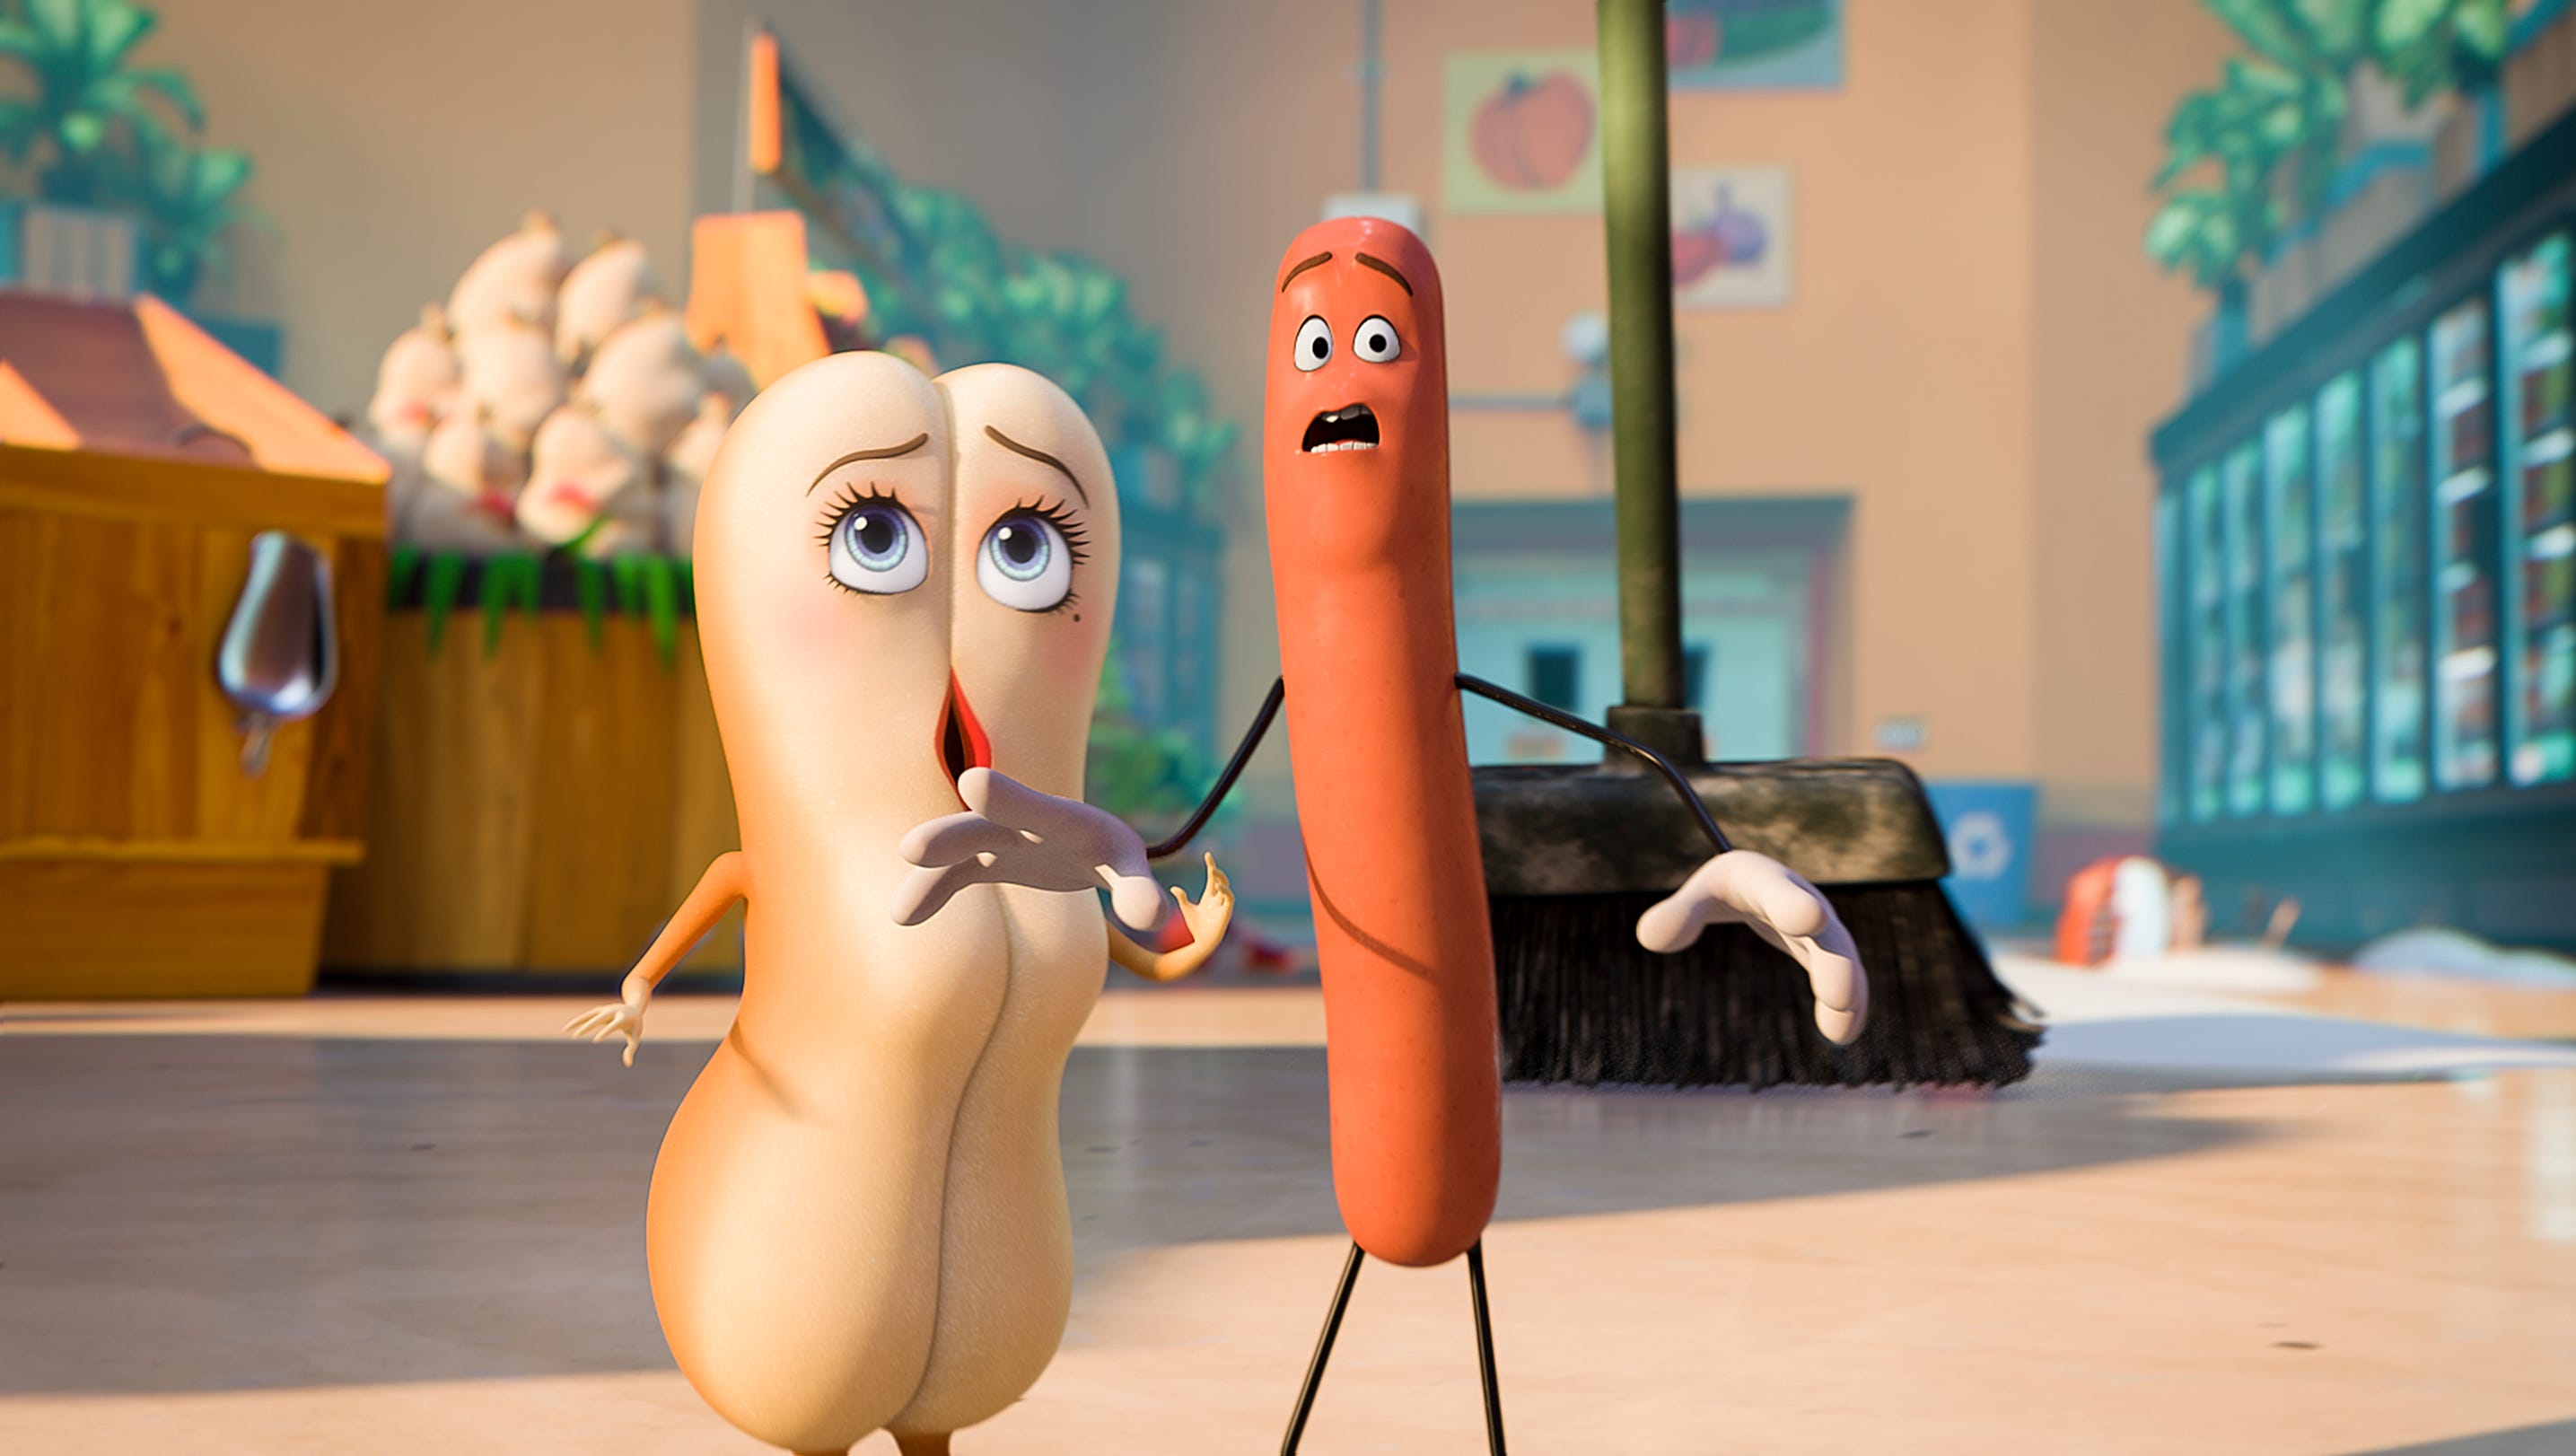 Life Like Sex Cartoon Movies - Review: Crude food comes to life in smart 'Sausage Party'